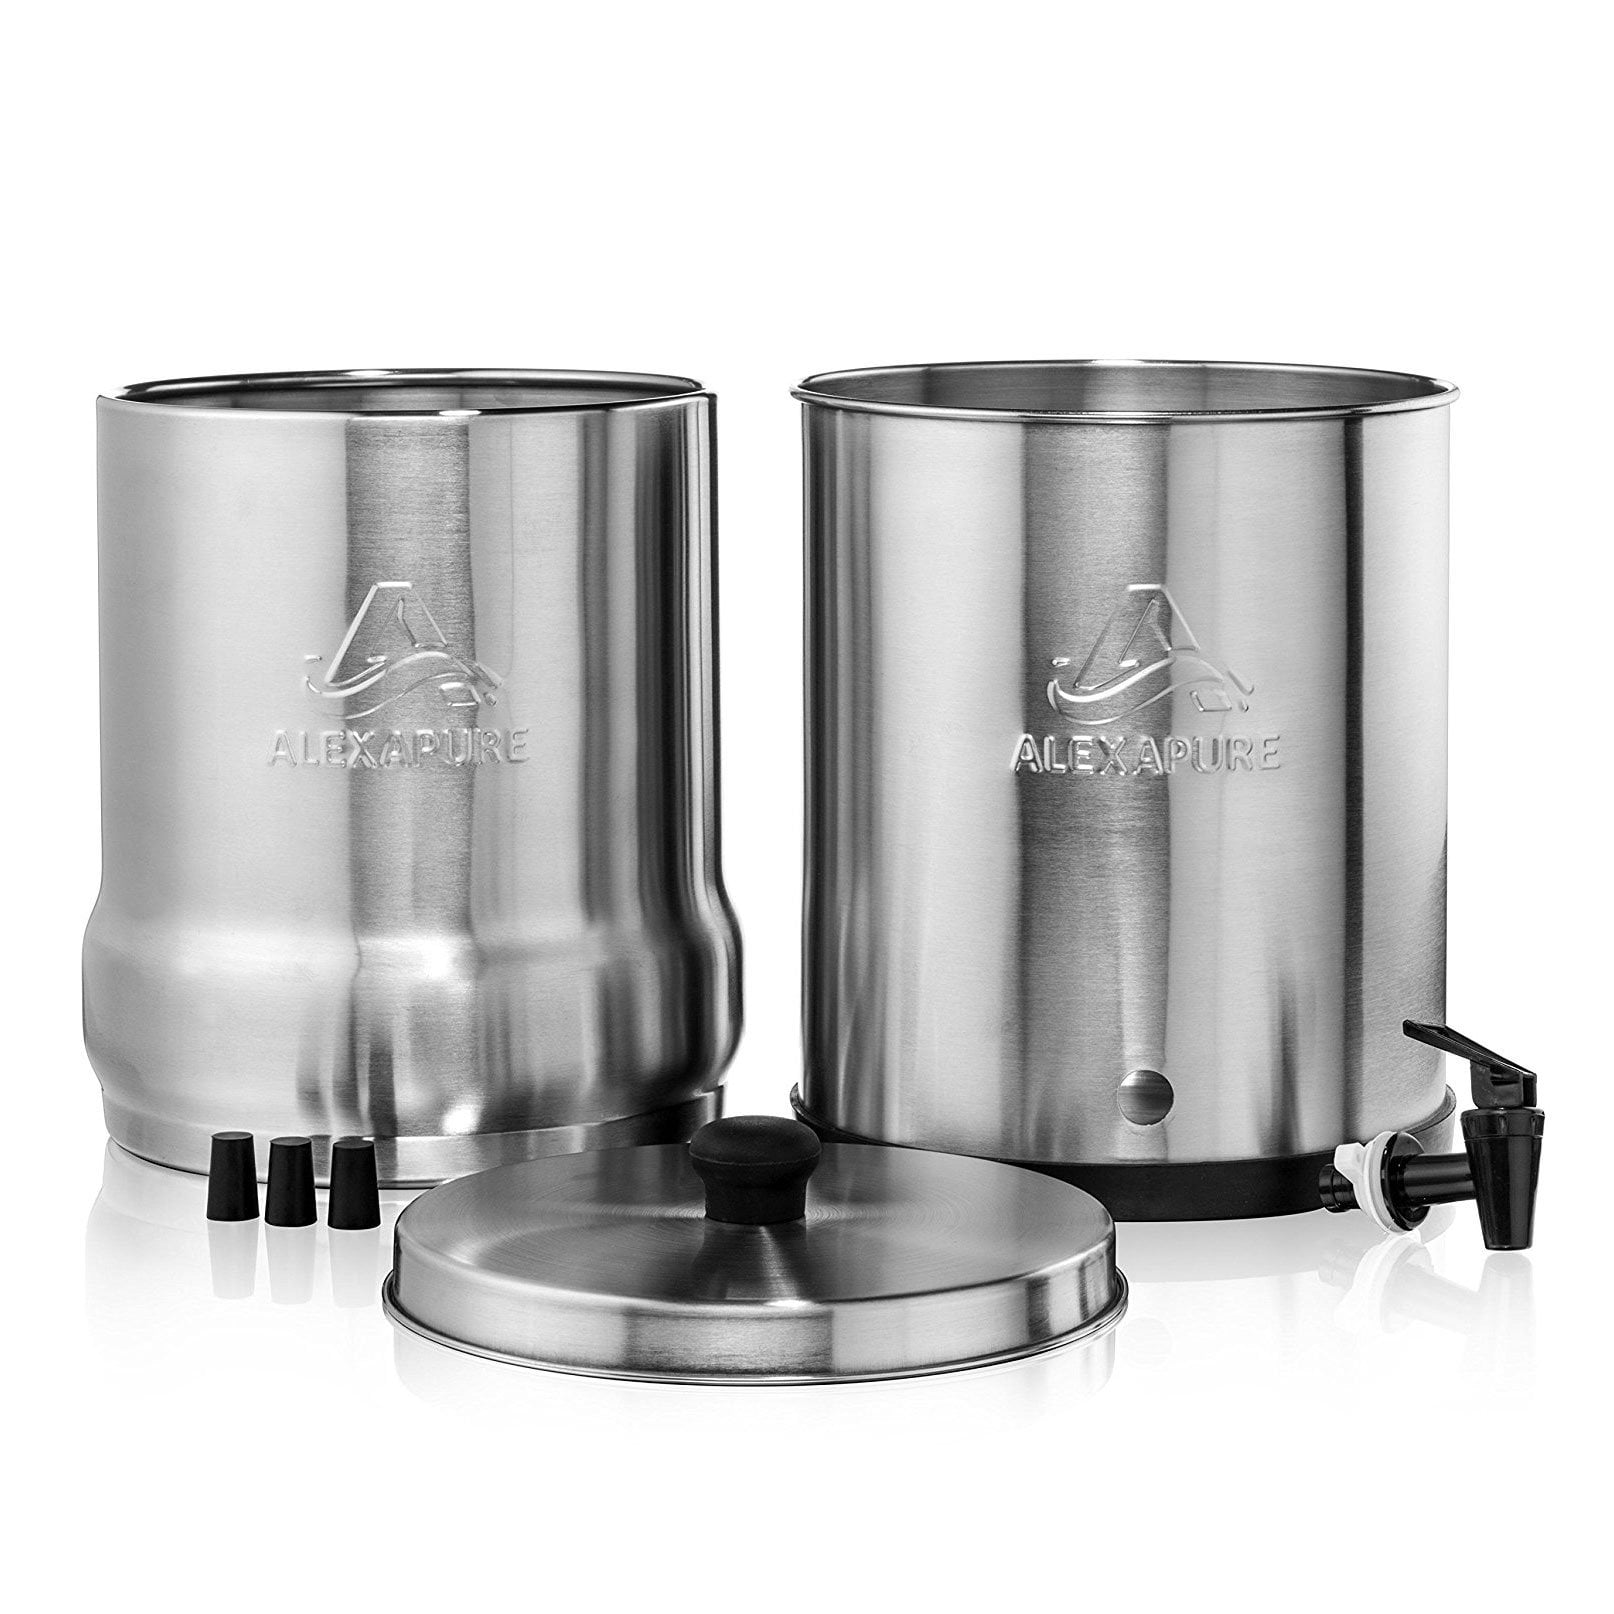 Alexapure Pro Stainless Steel Water Filter Filtration System NEW 